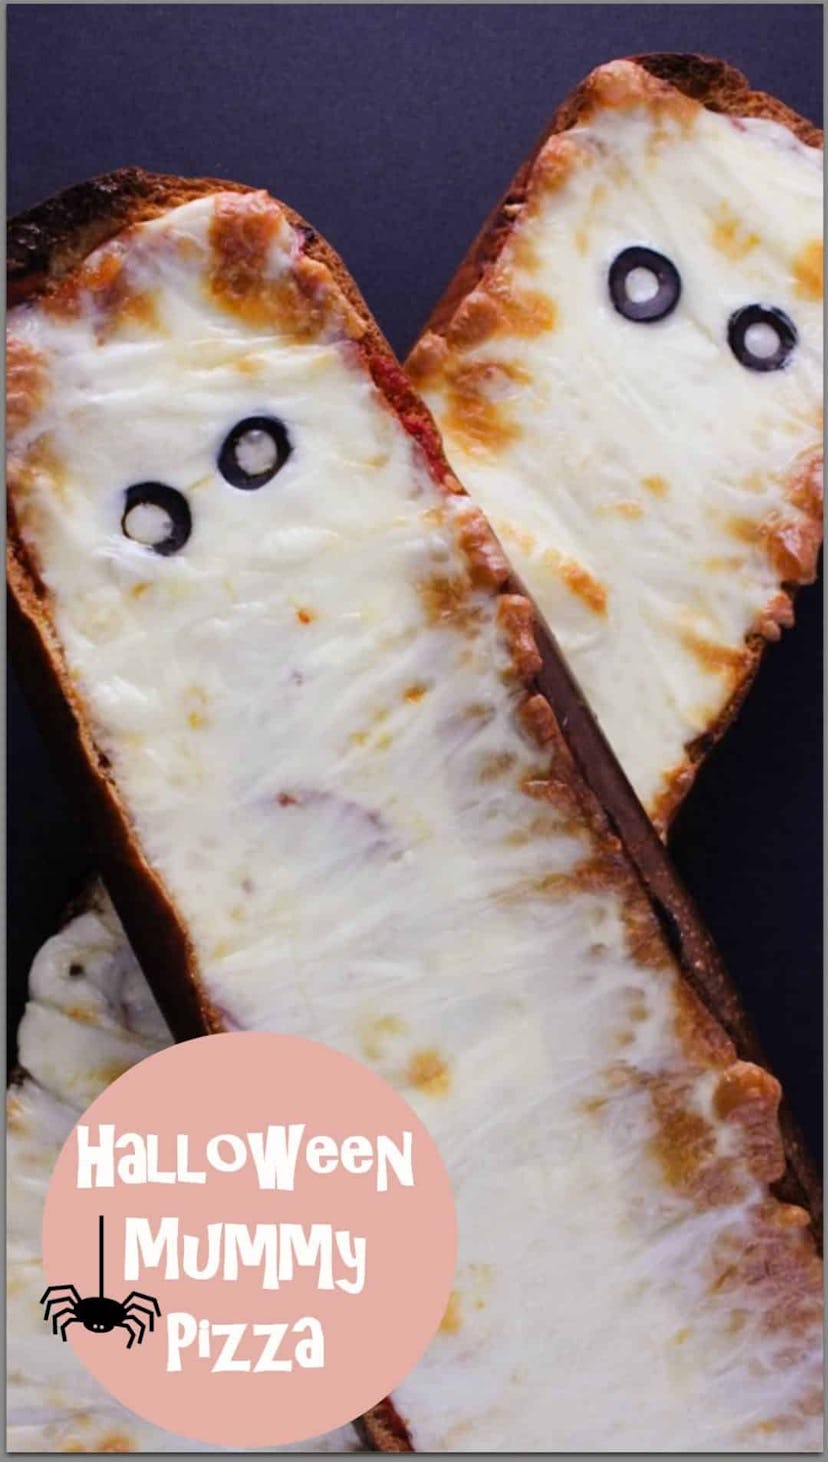 French Bread Mummy Pizza is one Halloween pizza idea.